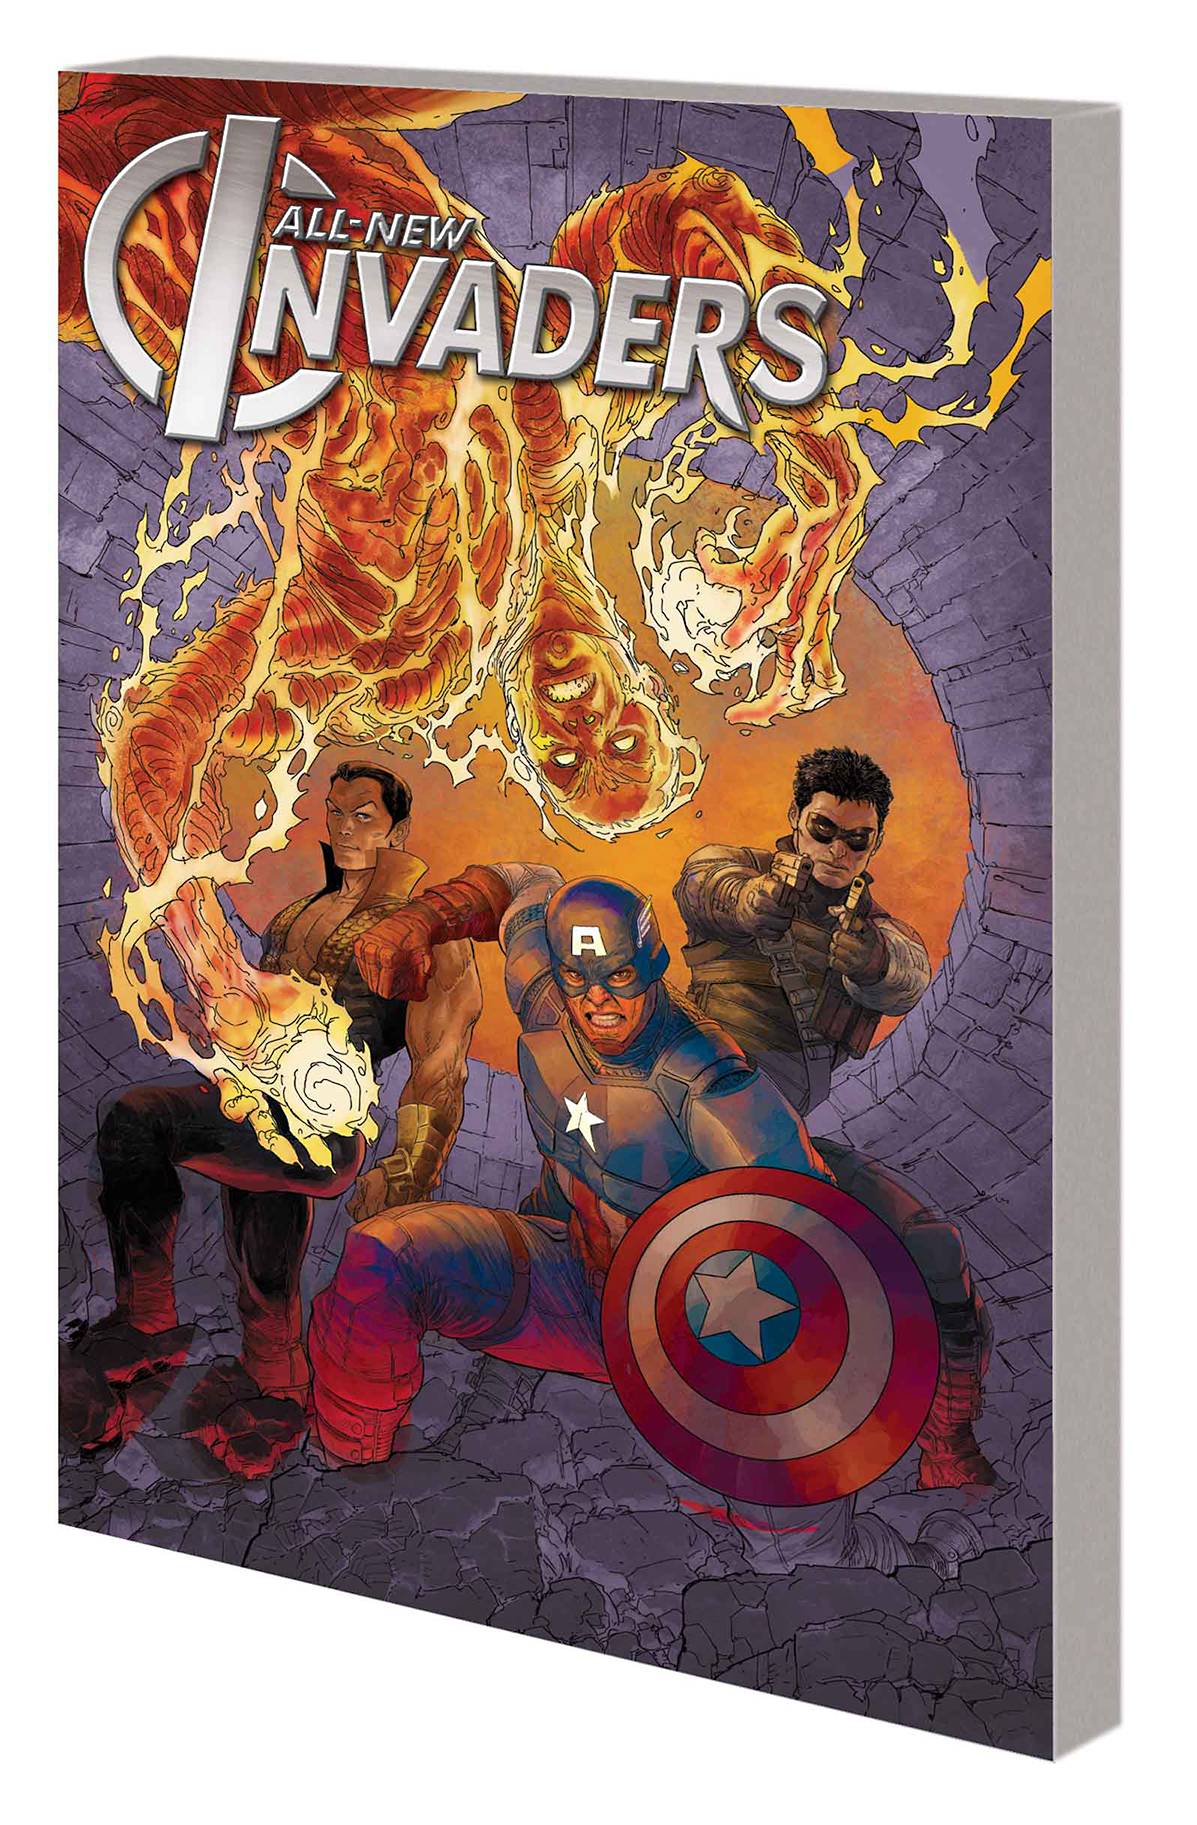 All New Invaders Vol. 01 Gods And Soldiers